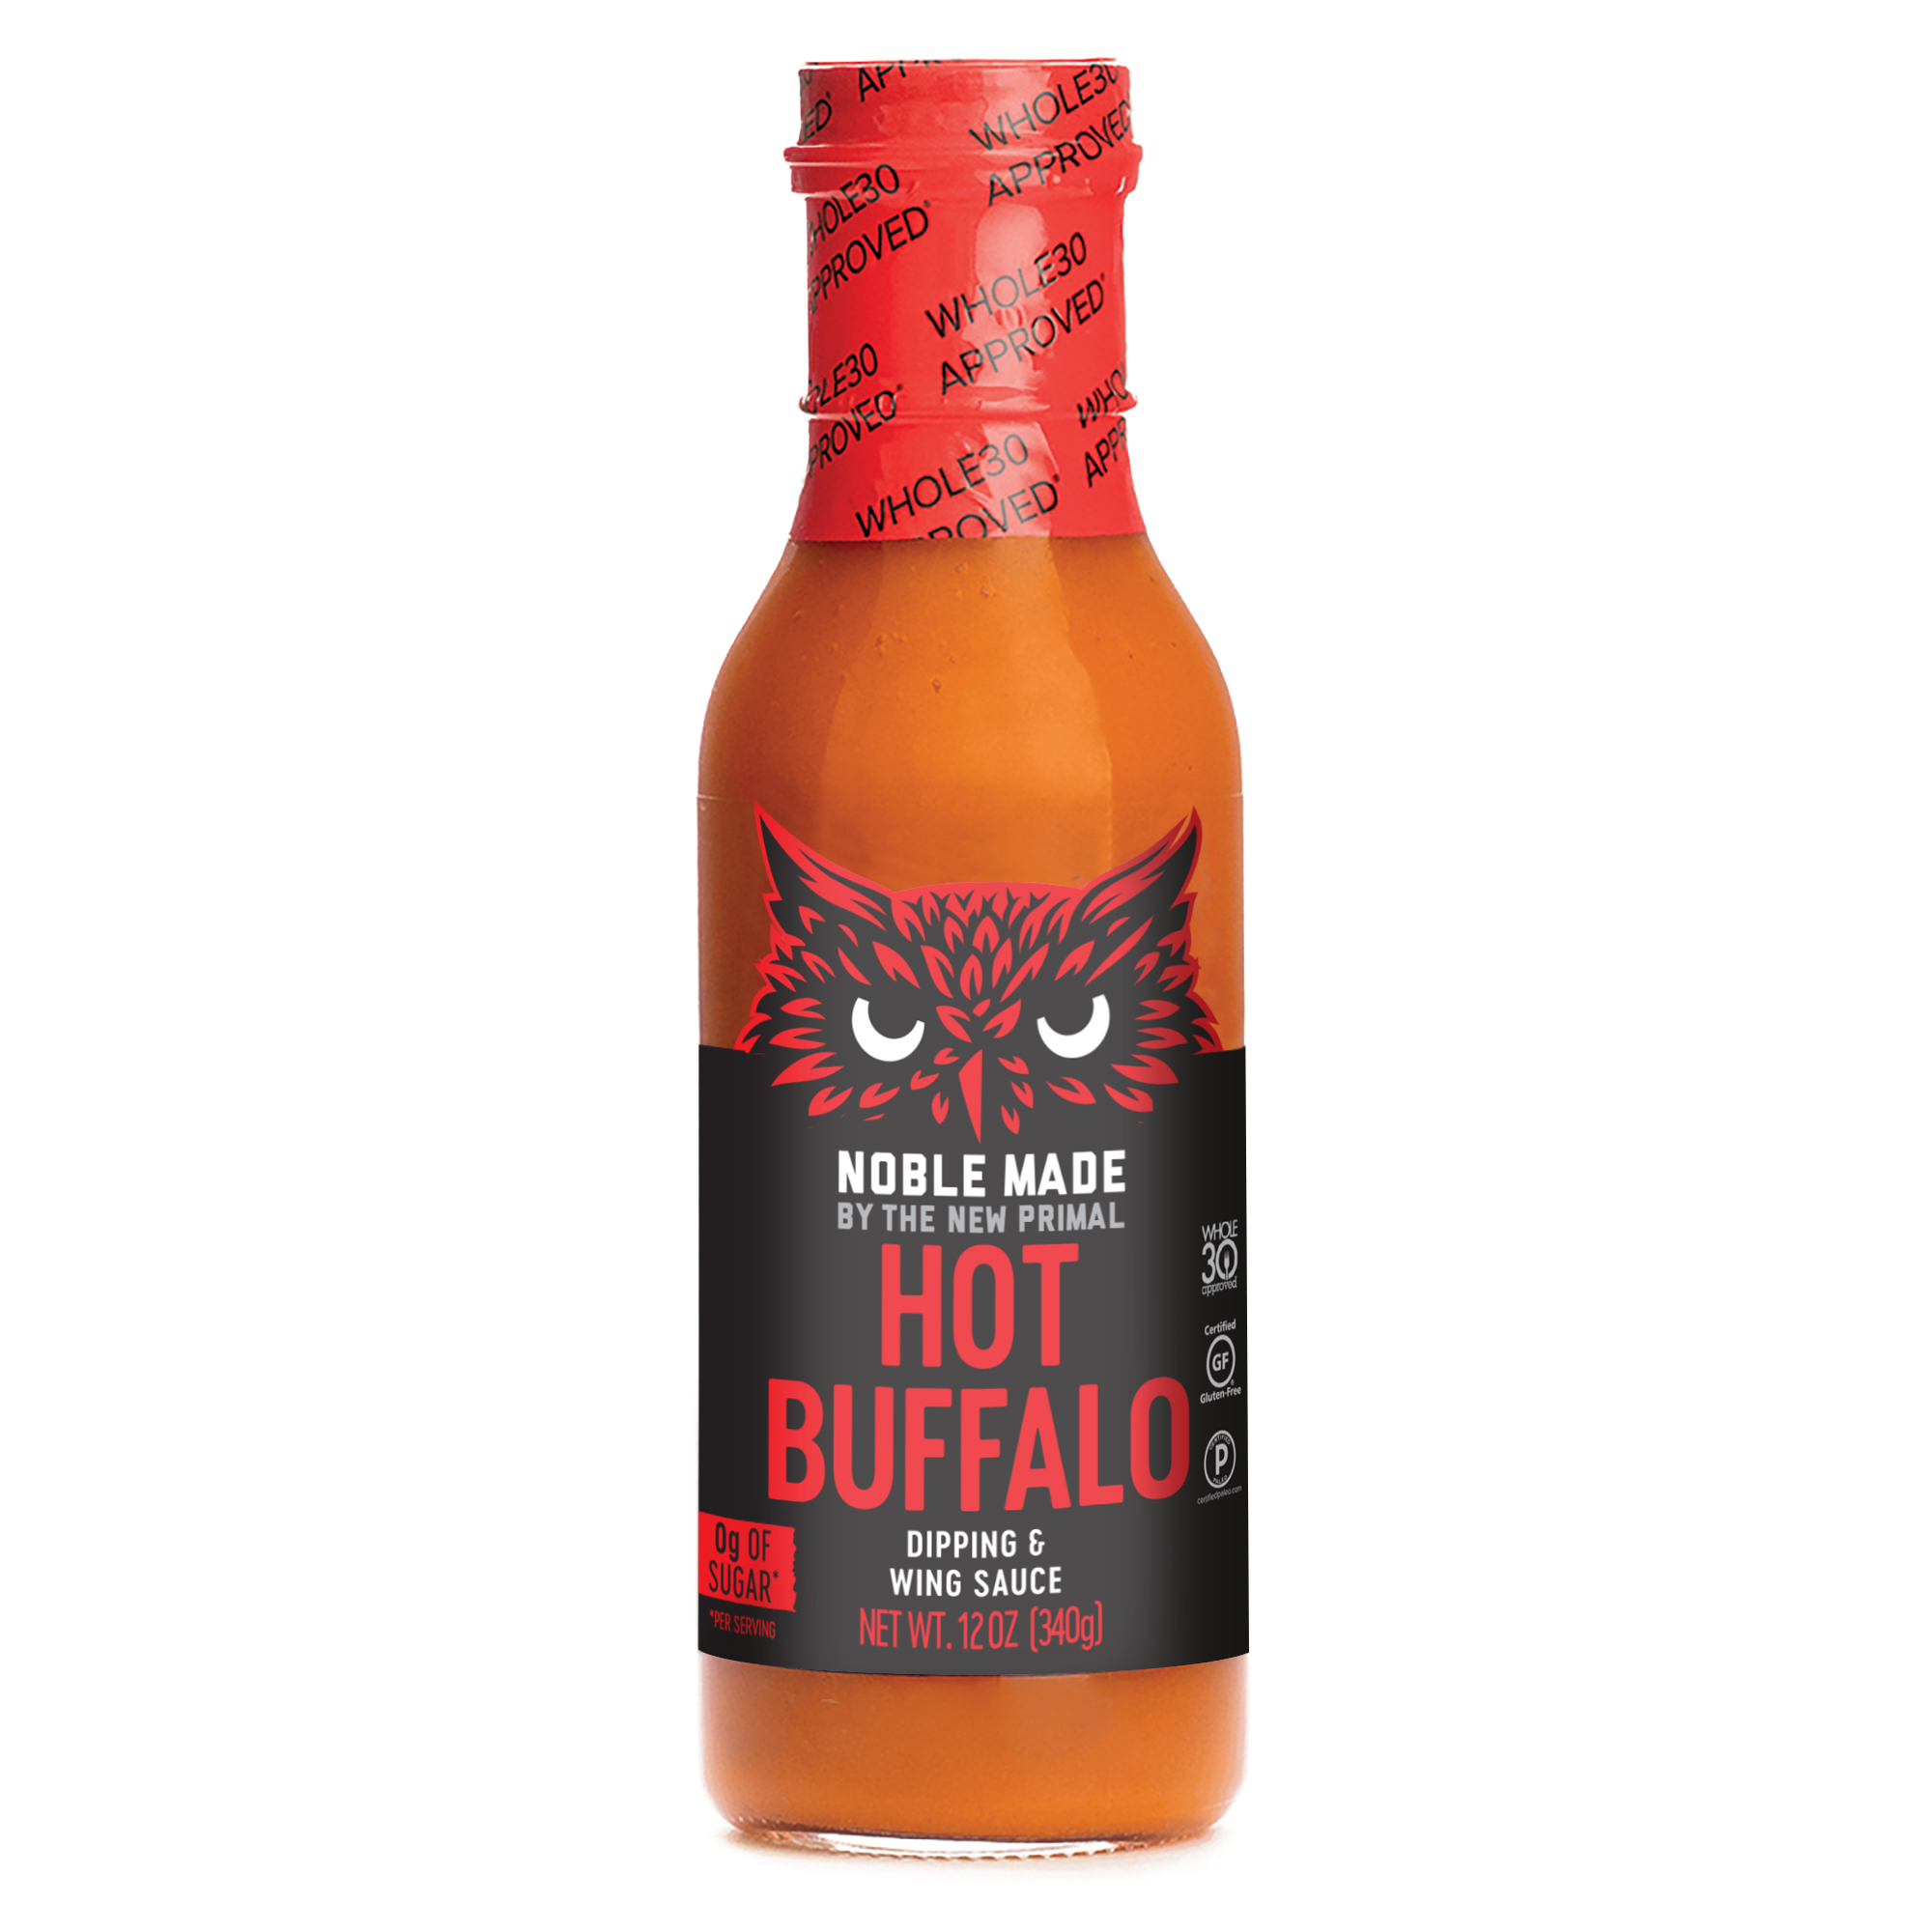 Whole30 Approved Buffalo Sauce with Certified Gluten-Free and Dairy Free – The New Primal